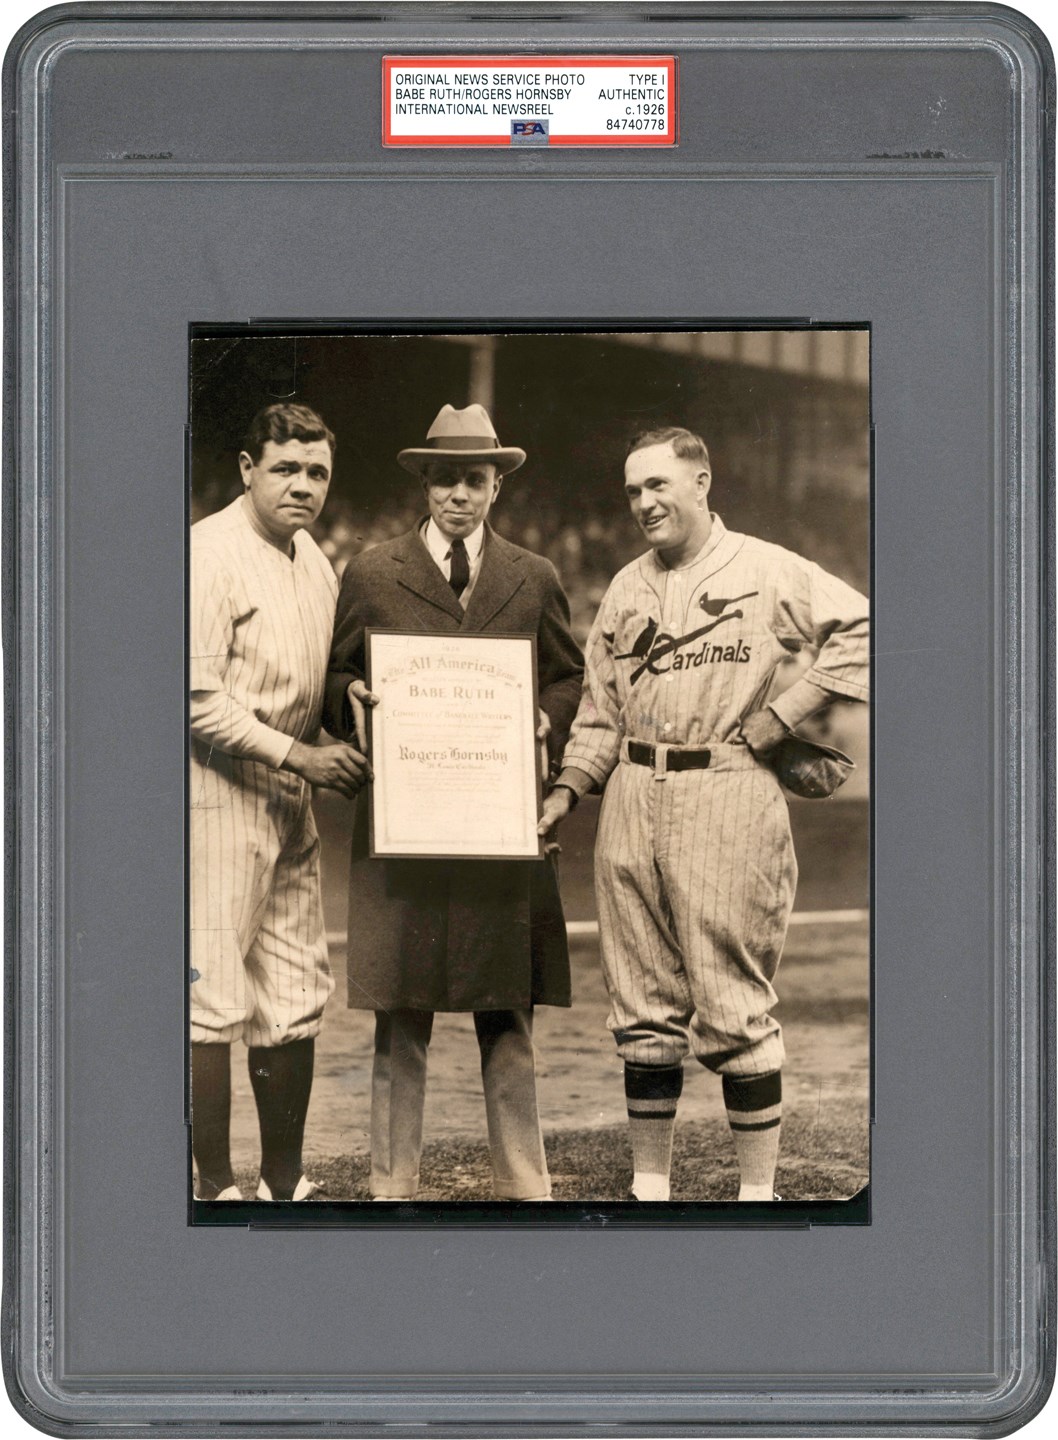 - Babe Ruth & Rogers Hornsby 1926 World Series Photograph (PSA Type I)